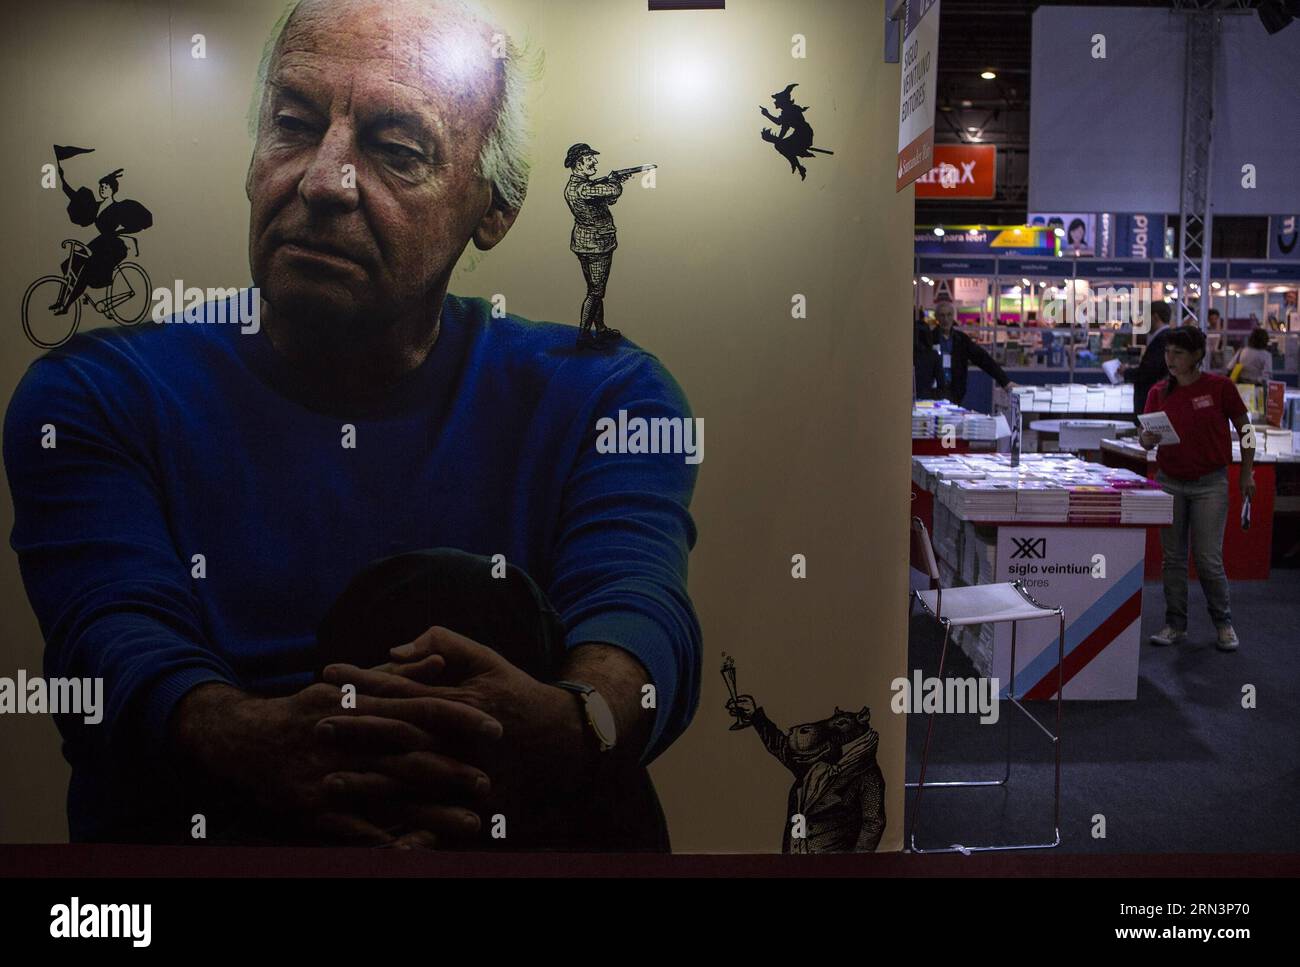 (150423) -- BUENOS AIRES, April 23, 2015 -- A poster with the image of the late Uruguayan writer Eduardo Galeano is seen during the 41st Buenos Aires International Book Fair, in Buenos Aires, Argentina, on April 23, 2015. Martin Zabala) (vf) ARGENTINA-BUENOS AIRES-CULTURE-BOOK FAIR e MARTINxZABALA PUBLICATIONxNOTxINxCHN   Buenos Aires April 23 2015 a Poster With The Image of The Late Uruguayan Writer Eduardo Galeano IS Lakes during The 41st Buenos Aires International Book Fair in Buenos Aires Argentina ON April 23 2015 Martin Zabala VF Argentina Buenos Aires Culture Book Fair e MartinXZabala P Stock Photo